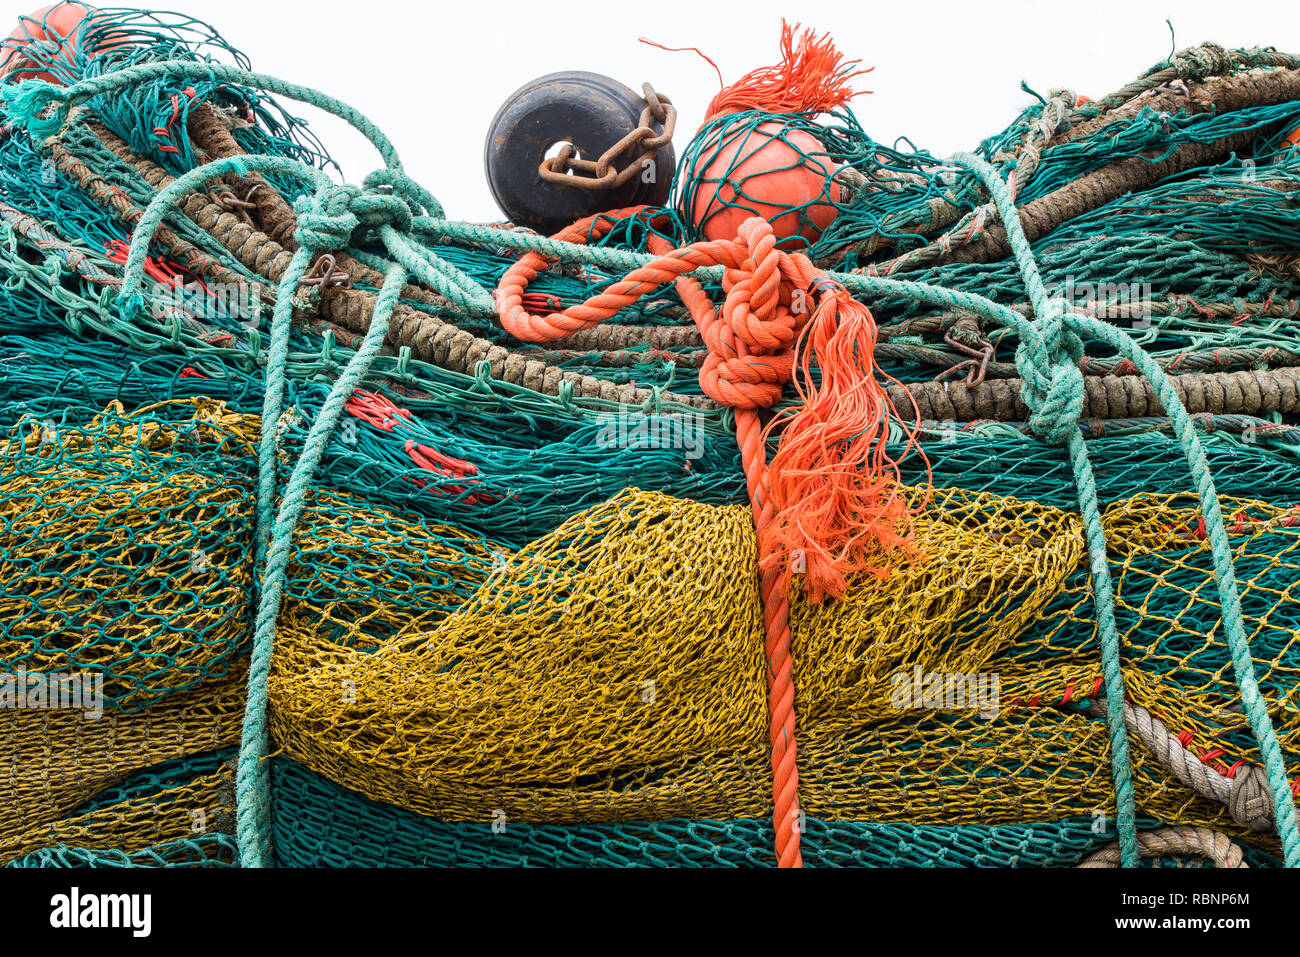 confusion of multicolored fishing nets Stock Photo